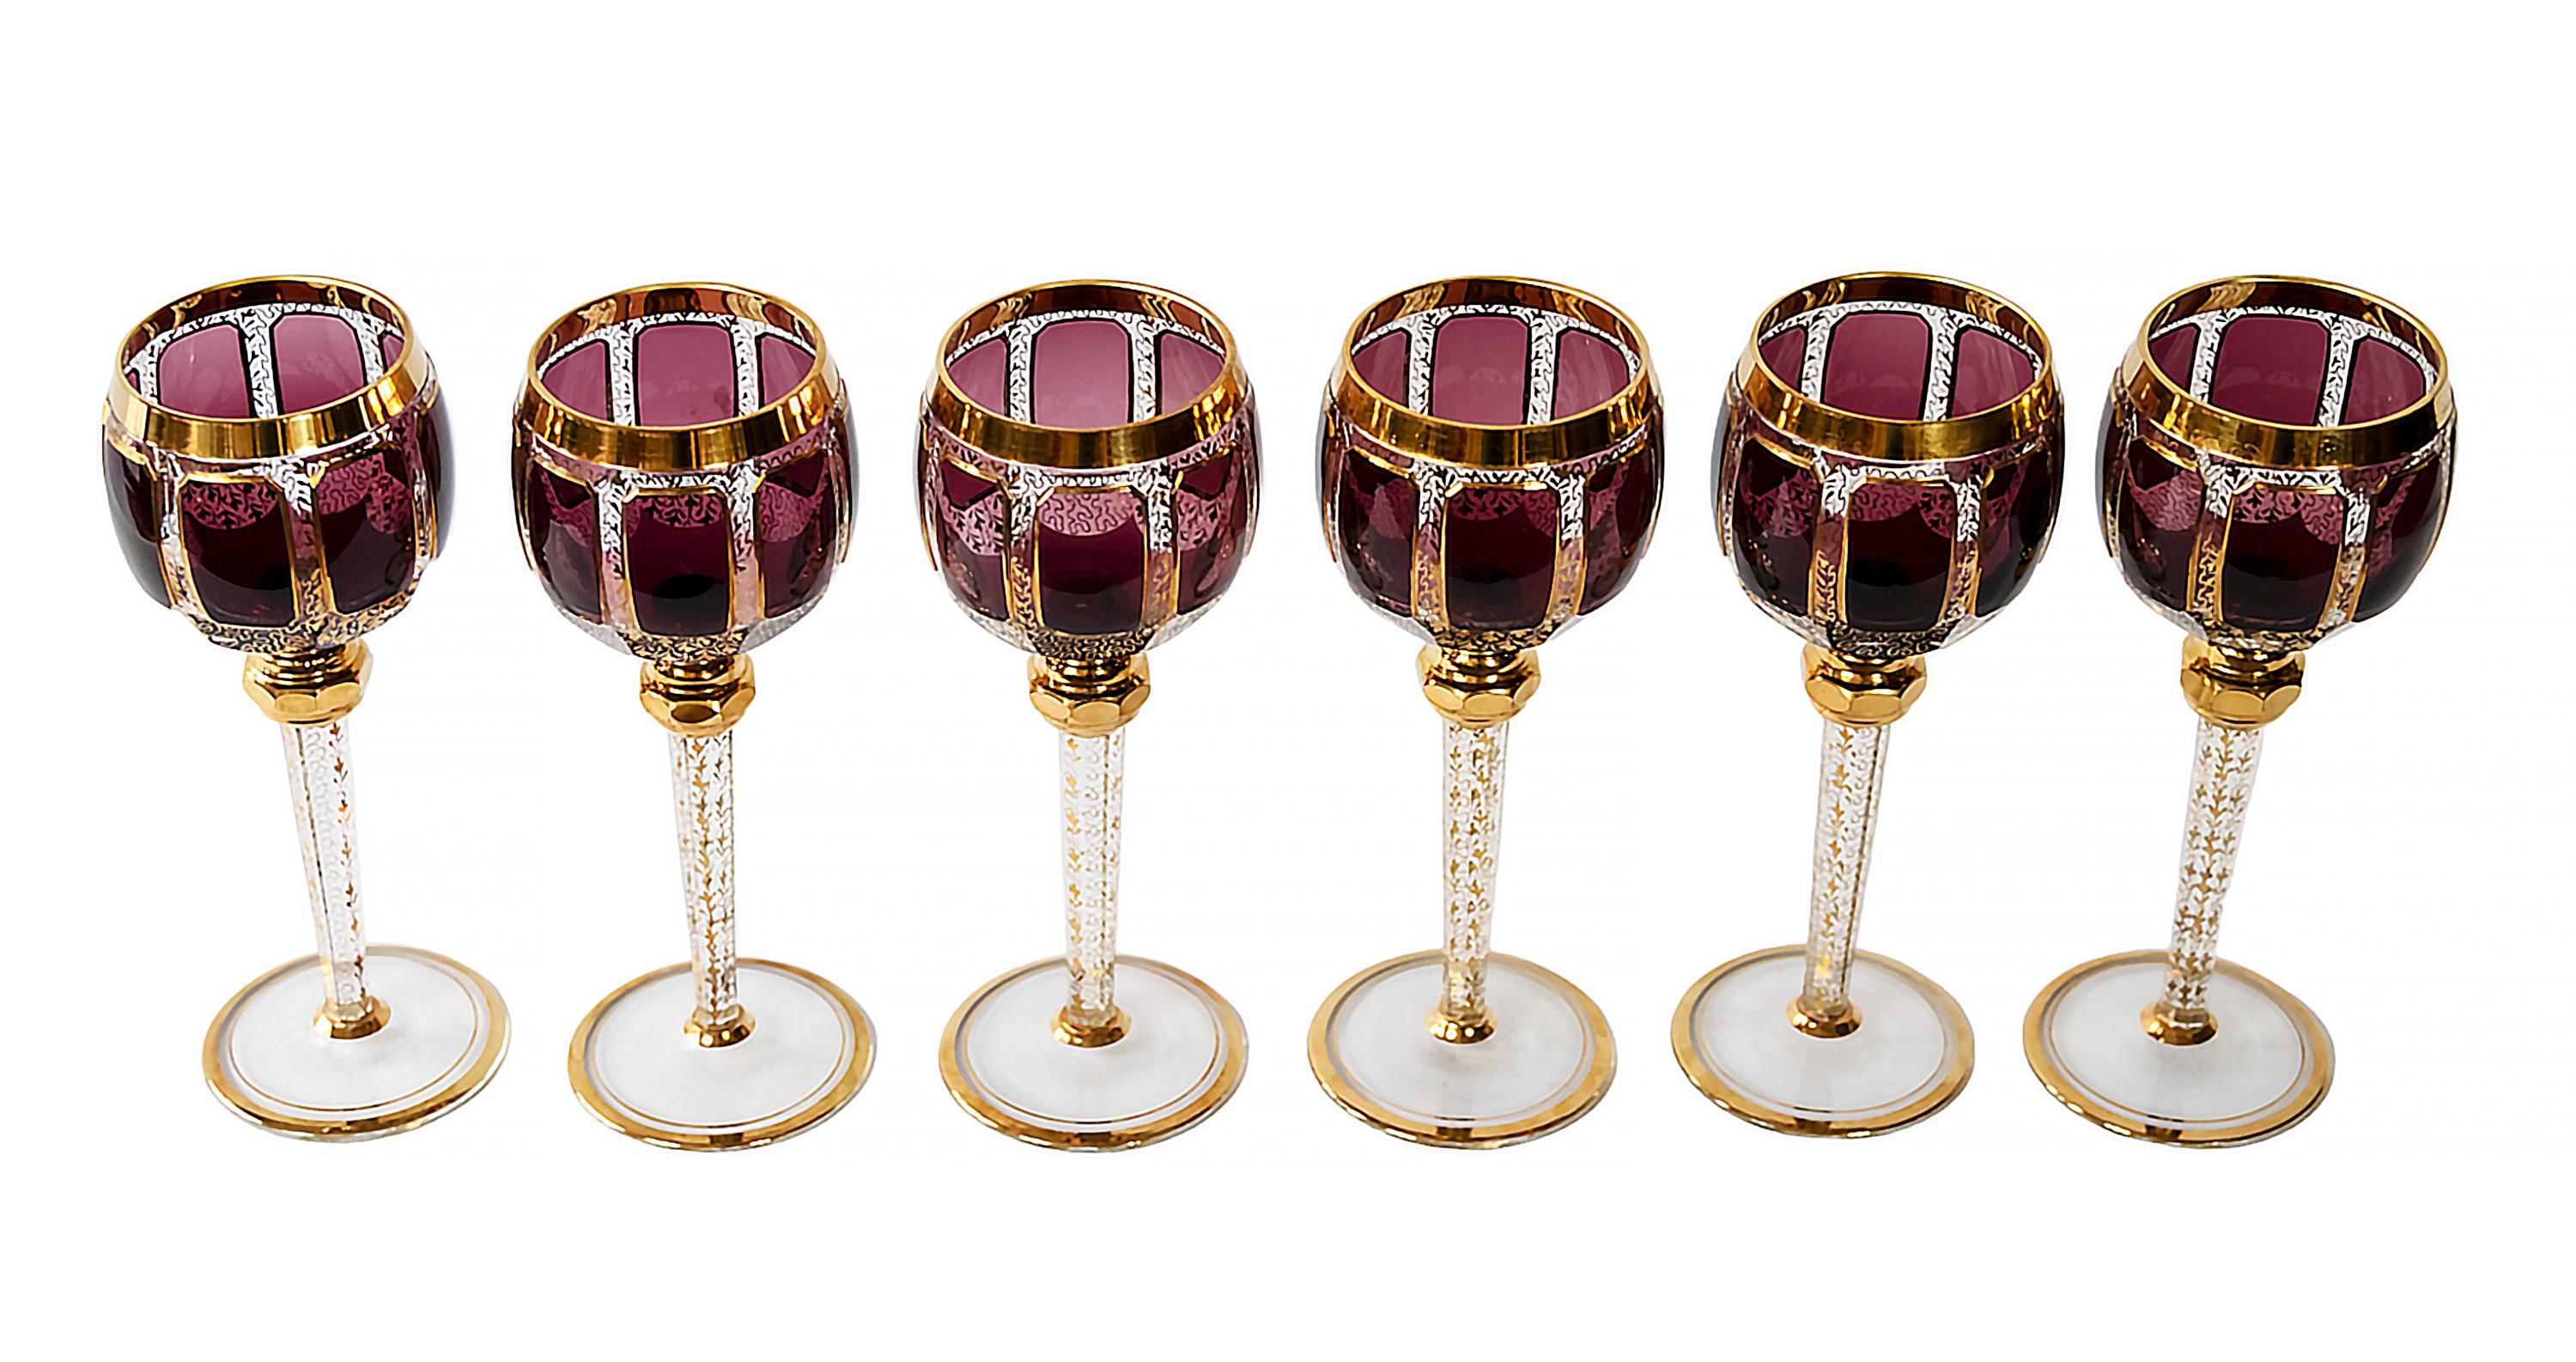 The set of 6 pcs. Bohemian wine glasses.
Each glass is transparent and decorated with dark amethyst/burgundy color glass, gilt trims and gold pattern through the glass.
Very good/excellent vintage condition.

